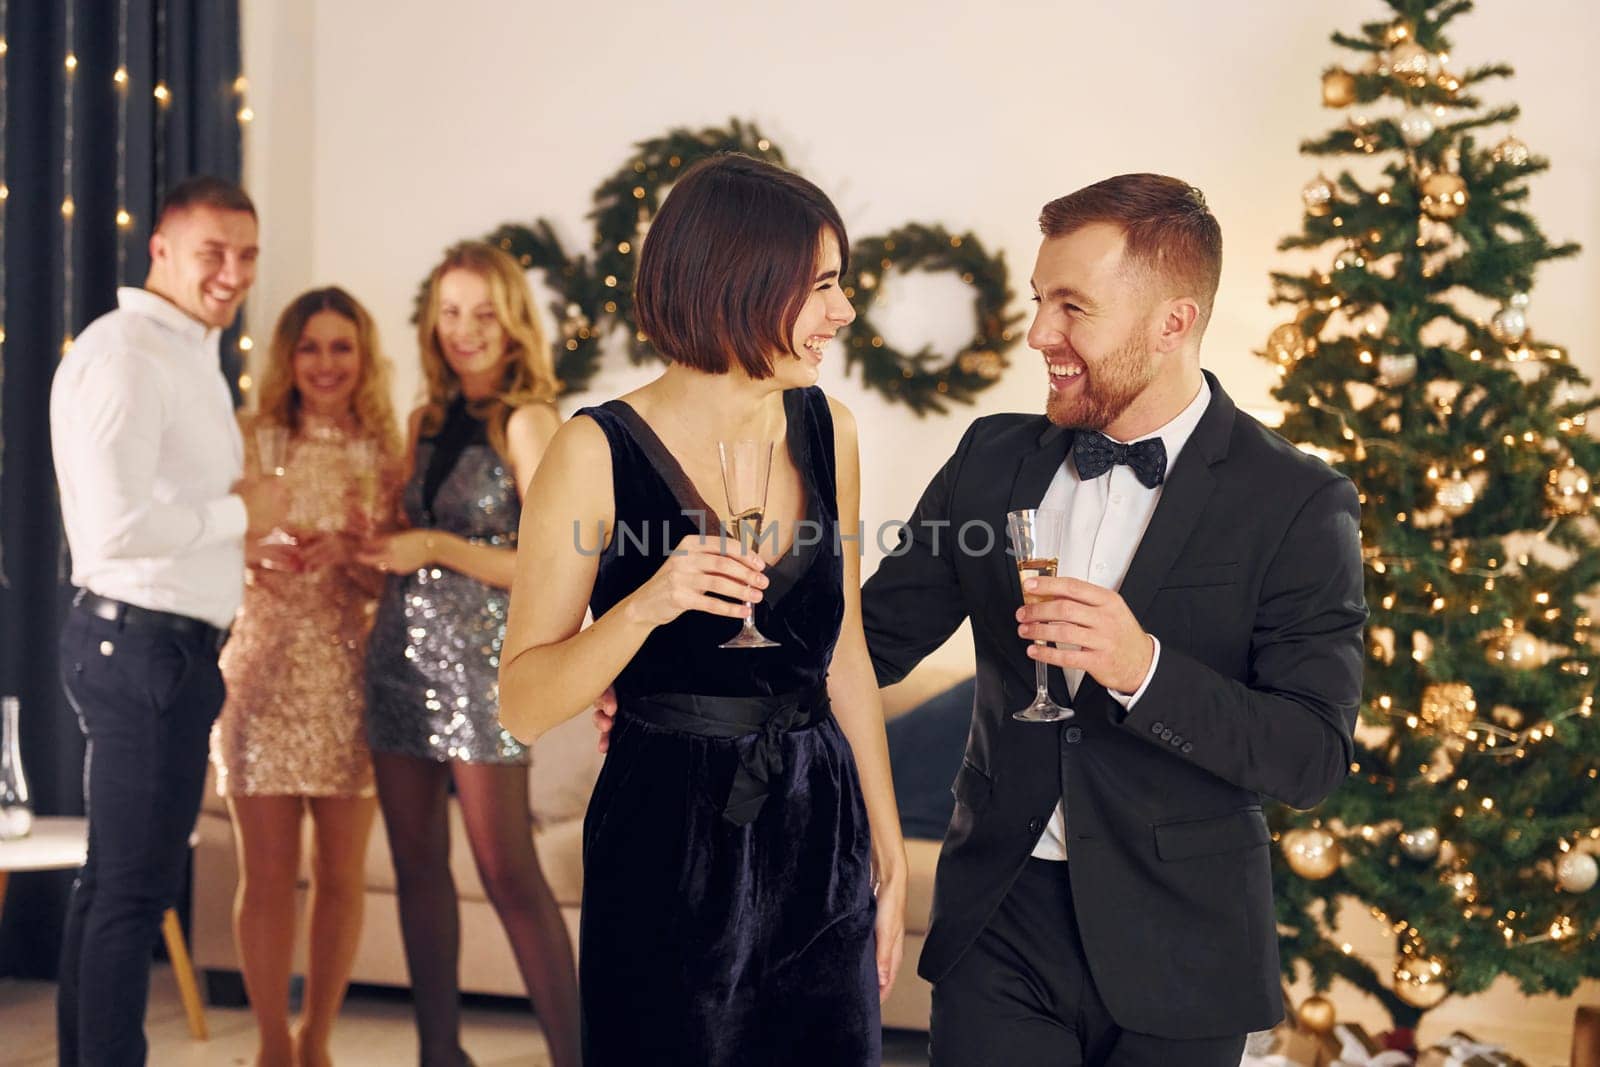 Having conversation. Group of people have a new year party indoors together.